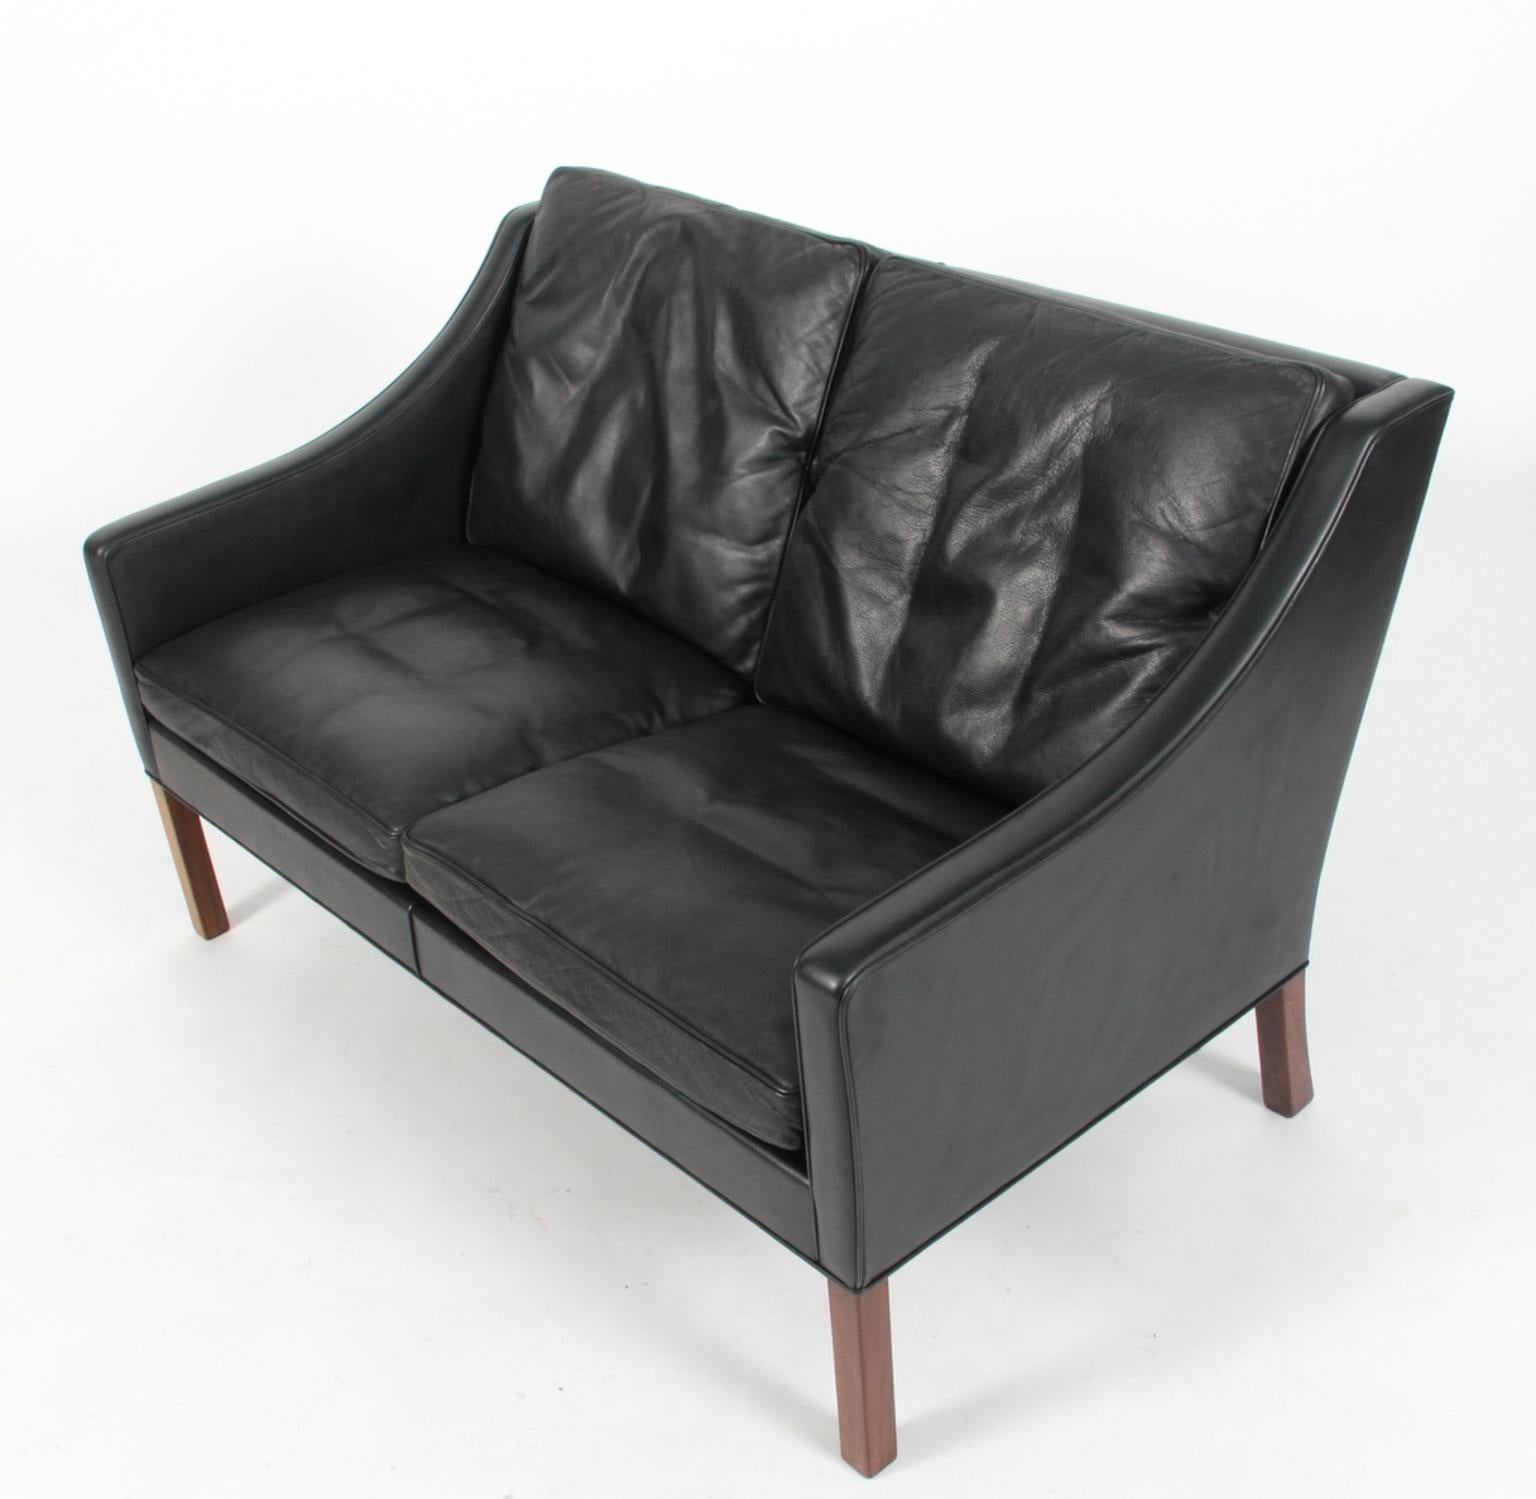 Børge Mogensen two-seater sofa original upholstered with black leather upholstery.

Legs of teak.

Model 2208, made by Fredericia furniture.